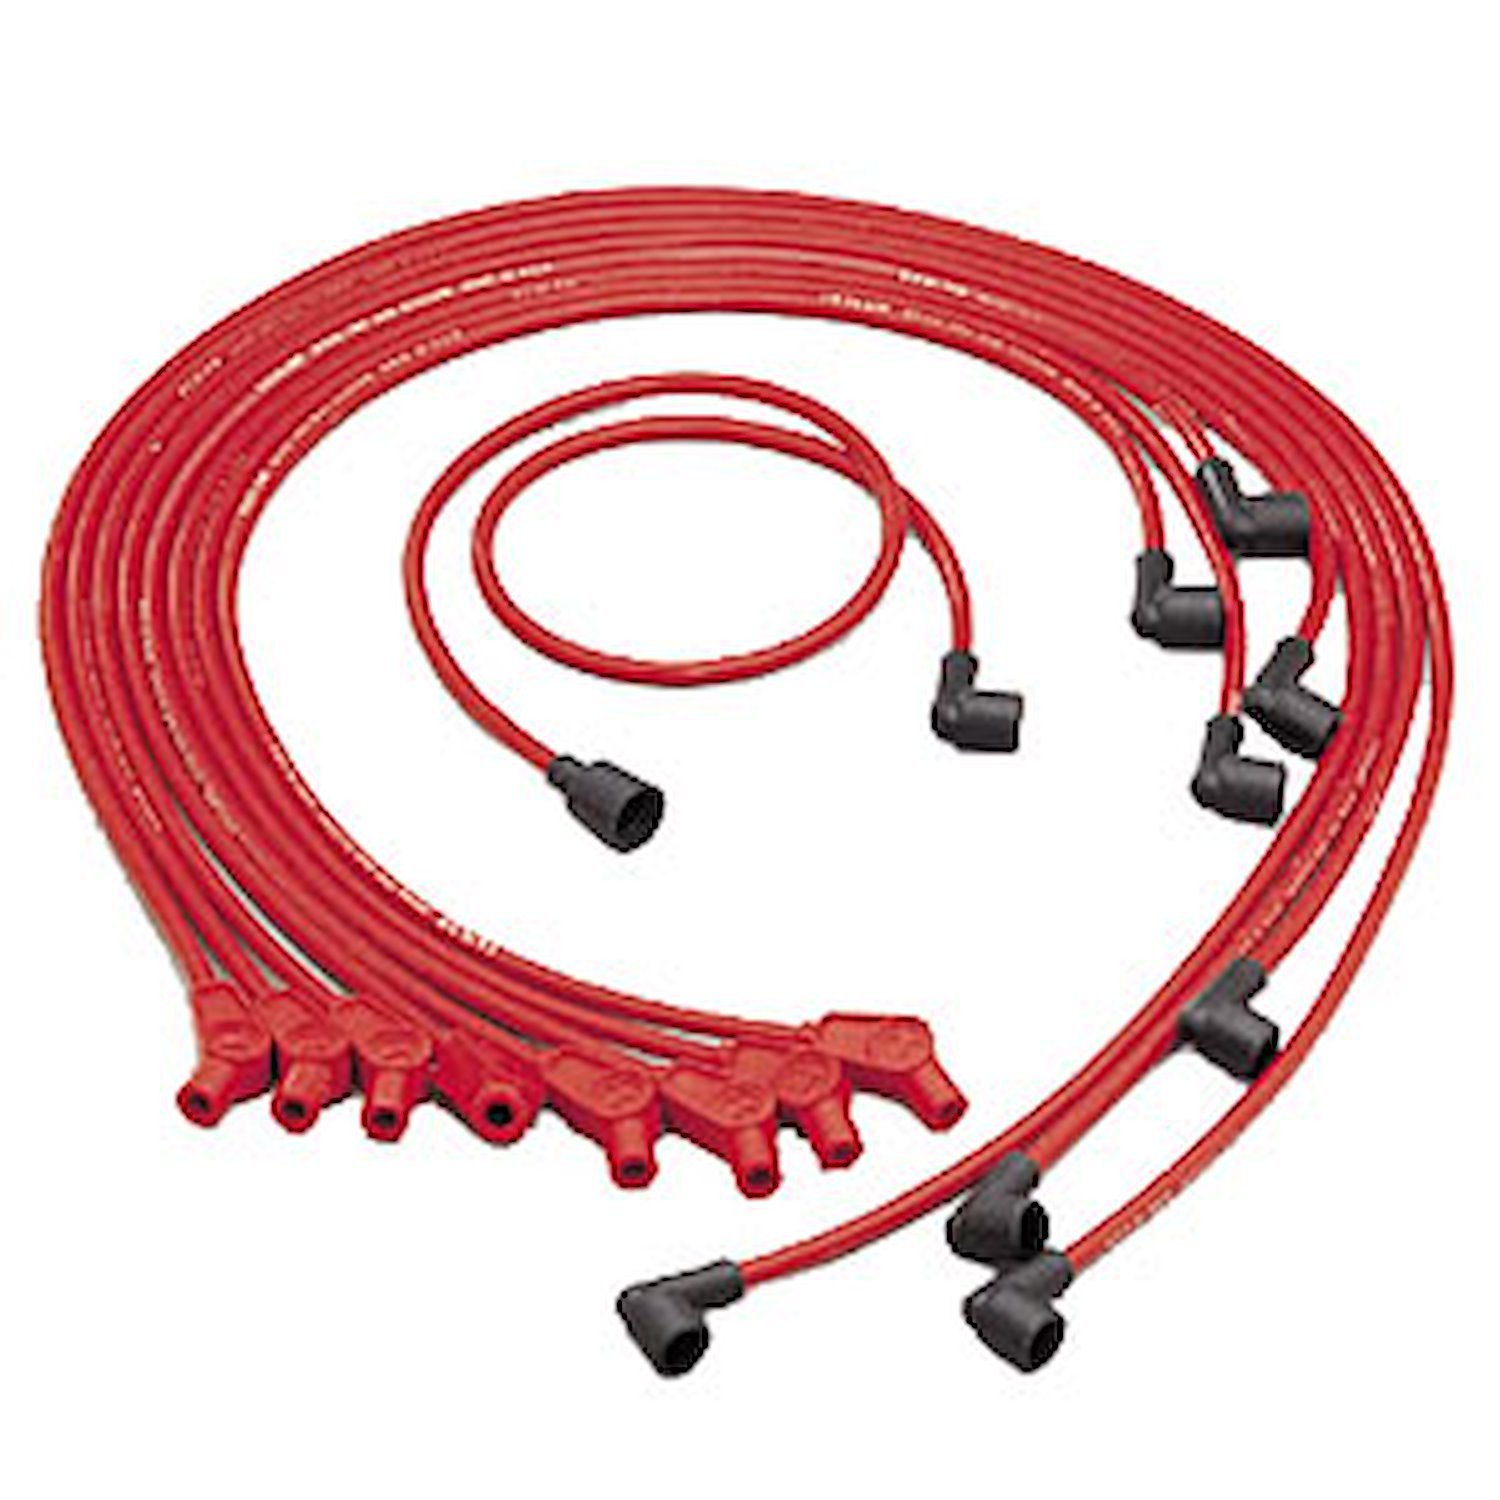 Spiro Pro 8mm Spark Plug Wires Universal Fit, 8 cyl